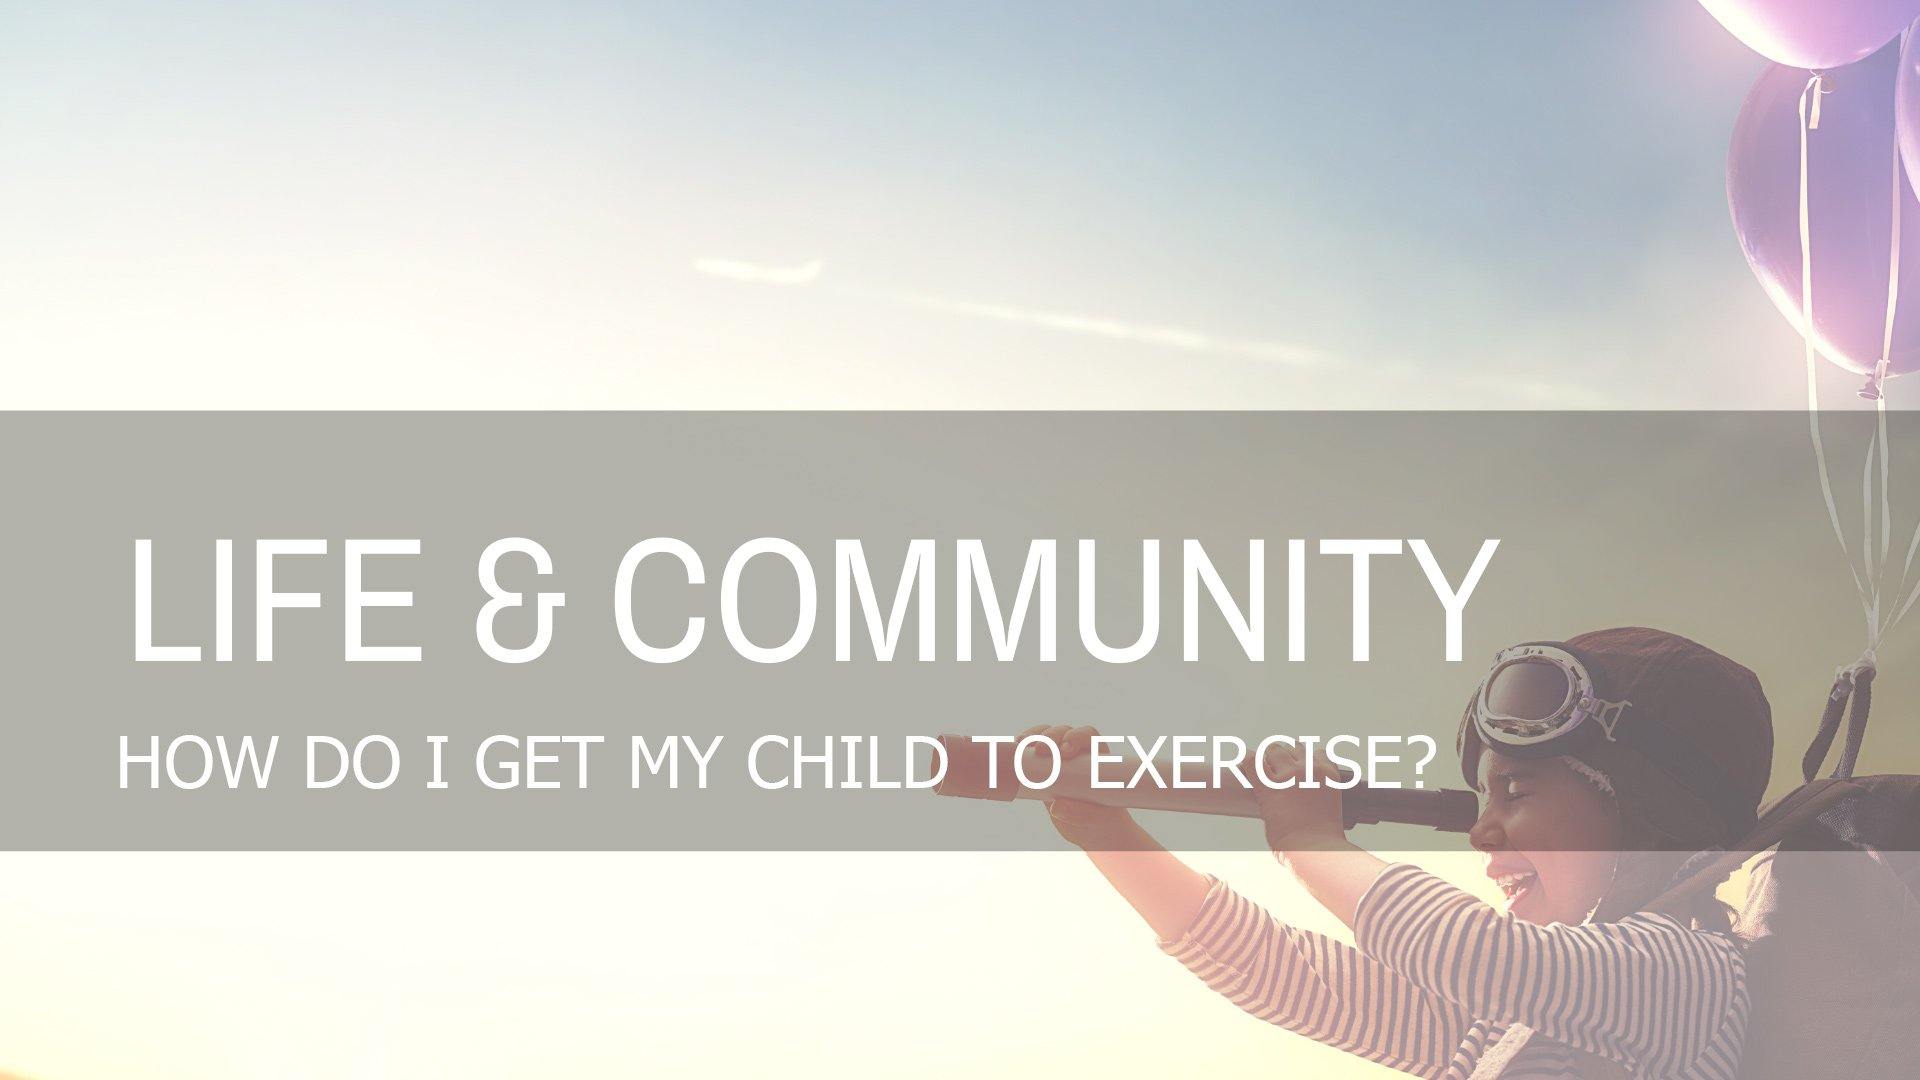 How Do I Get My Child to Exercise?